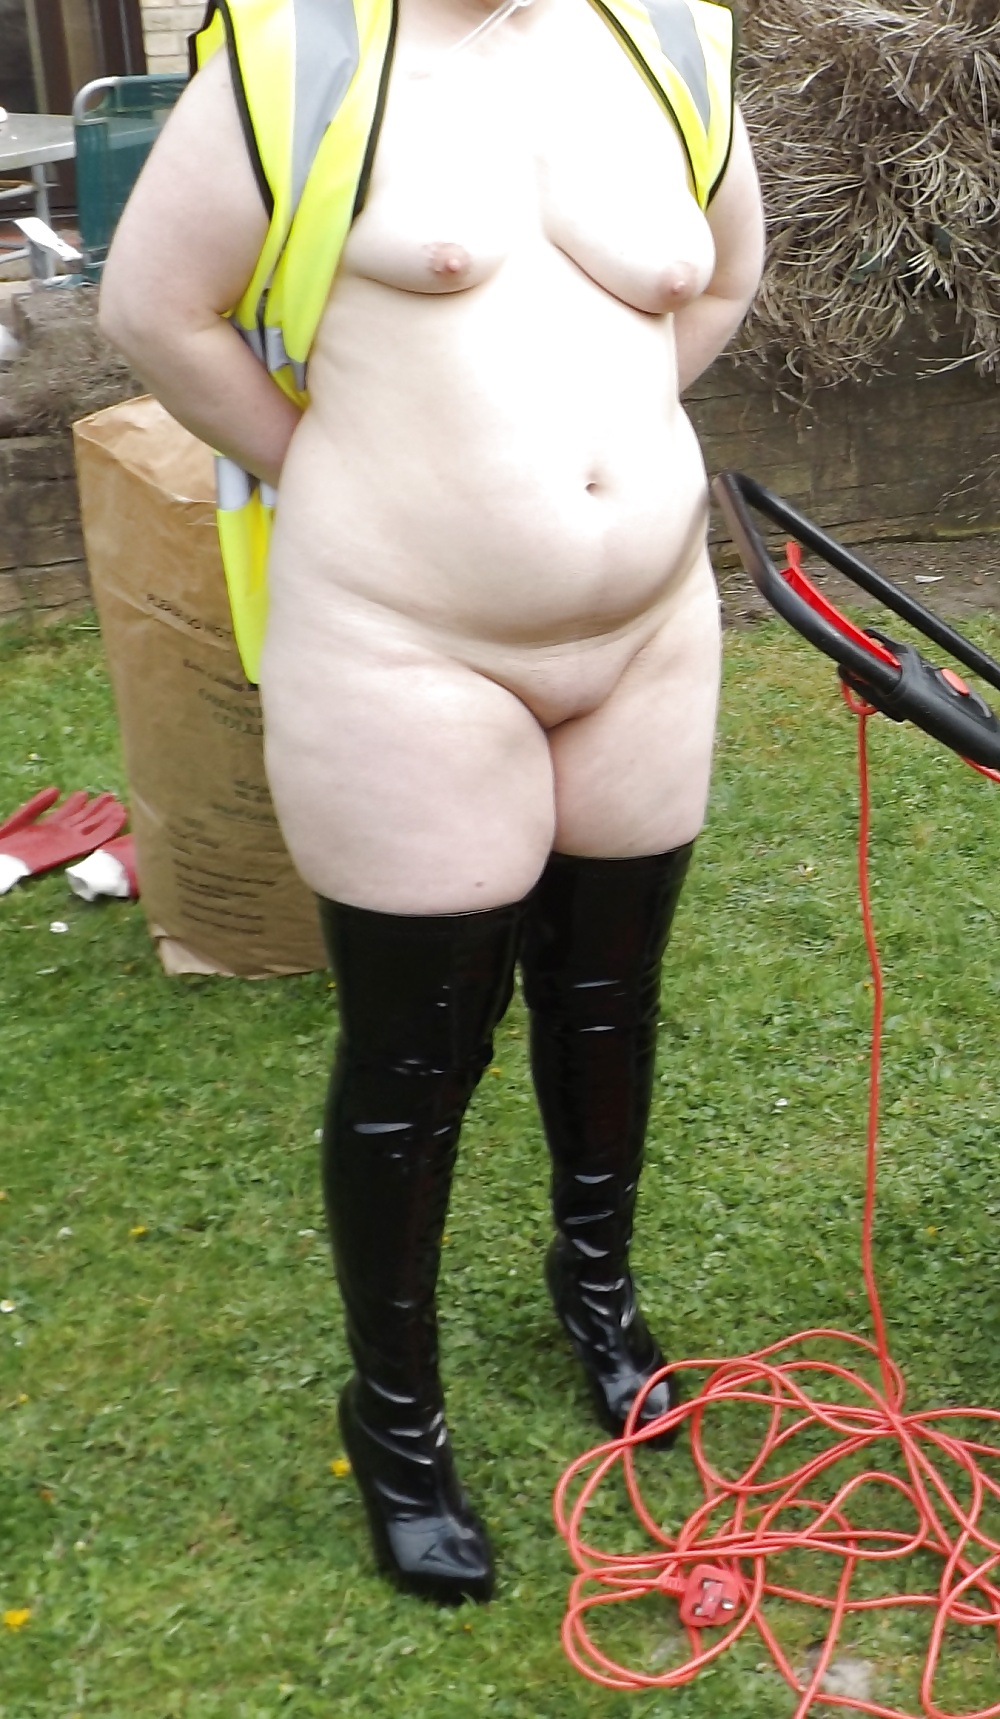 Mowing the lawn in PVC thigh boots #18903406